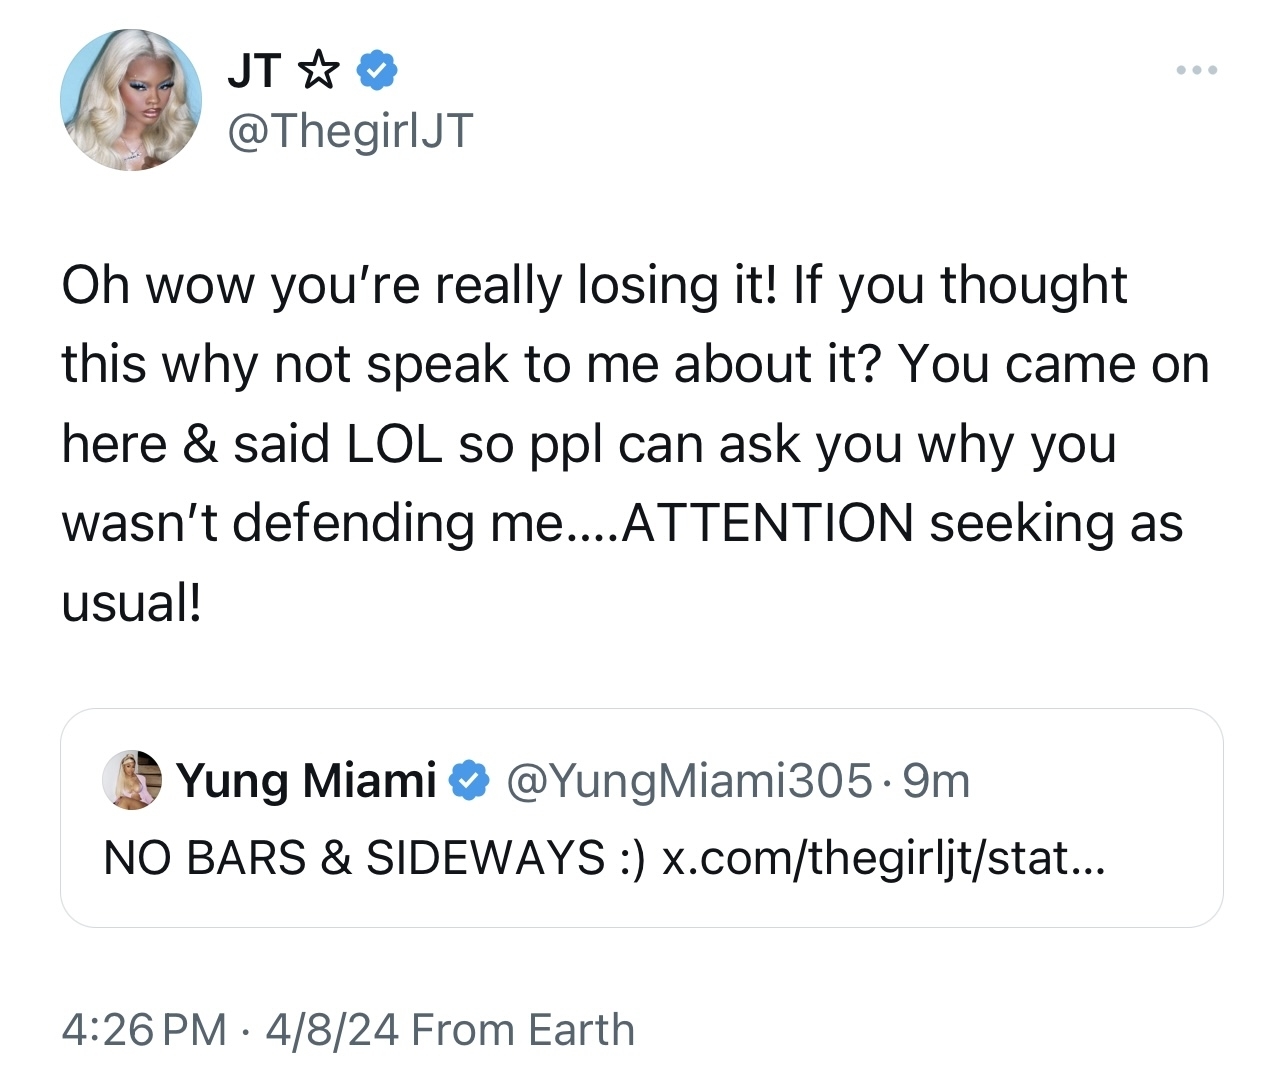 JT tweets a response questioning someone&#x27;s behavior for not speaking to her directly and mentions attention-seeking